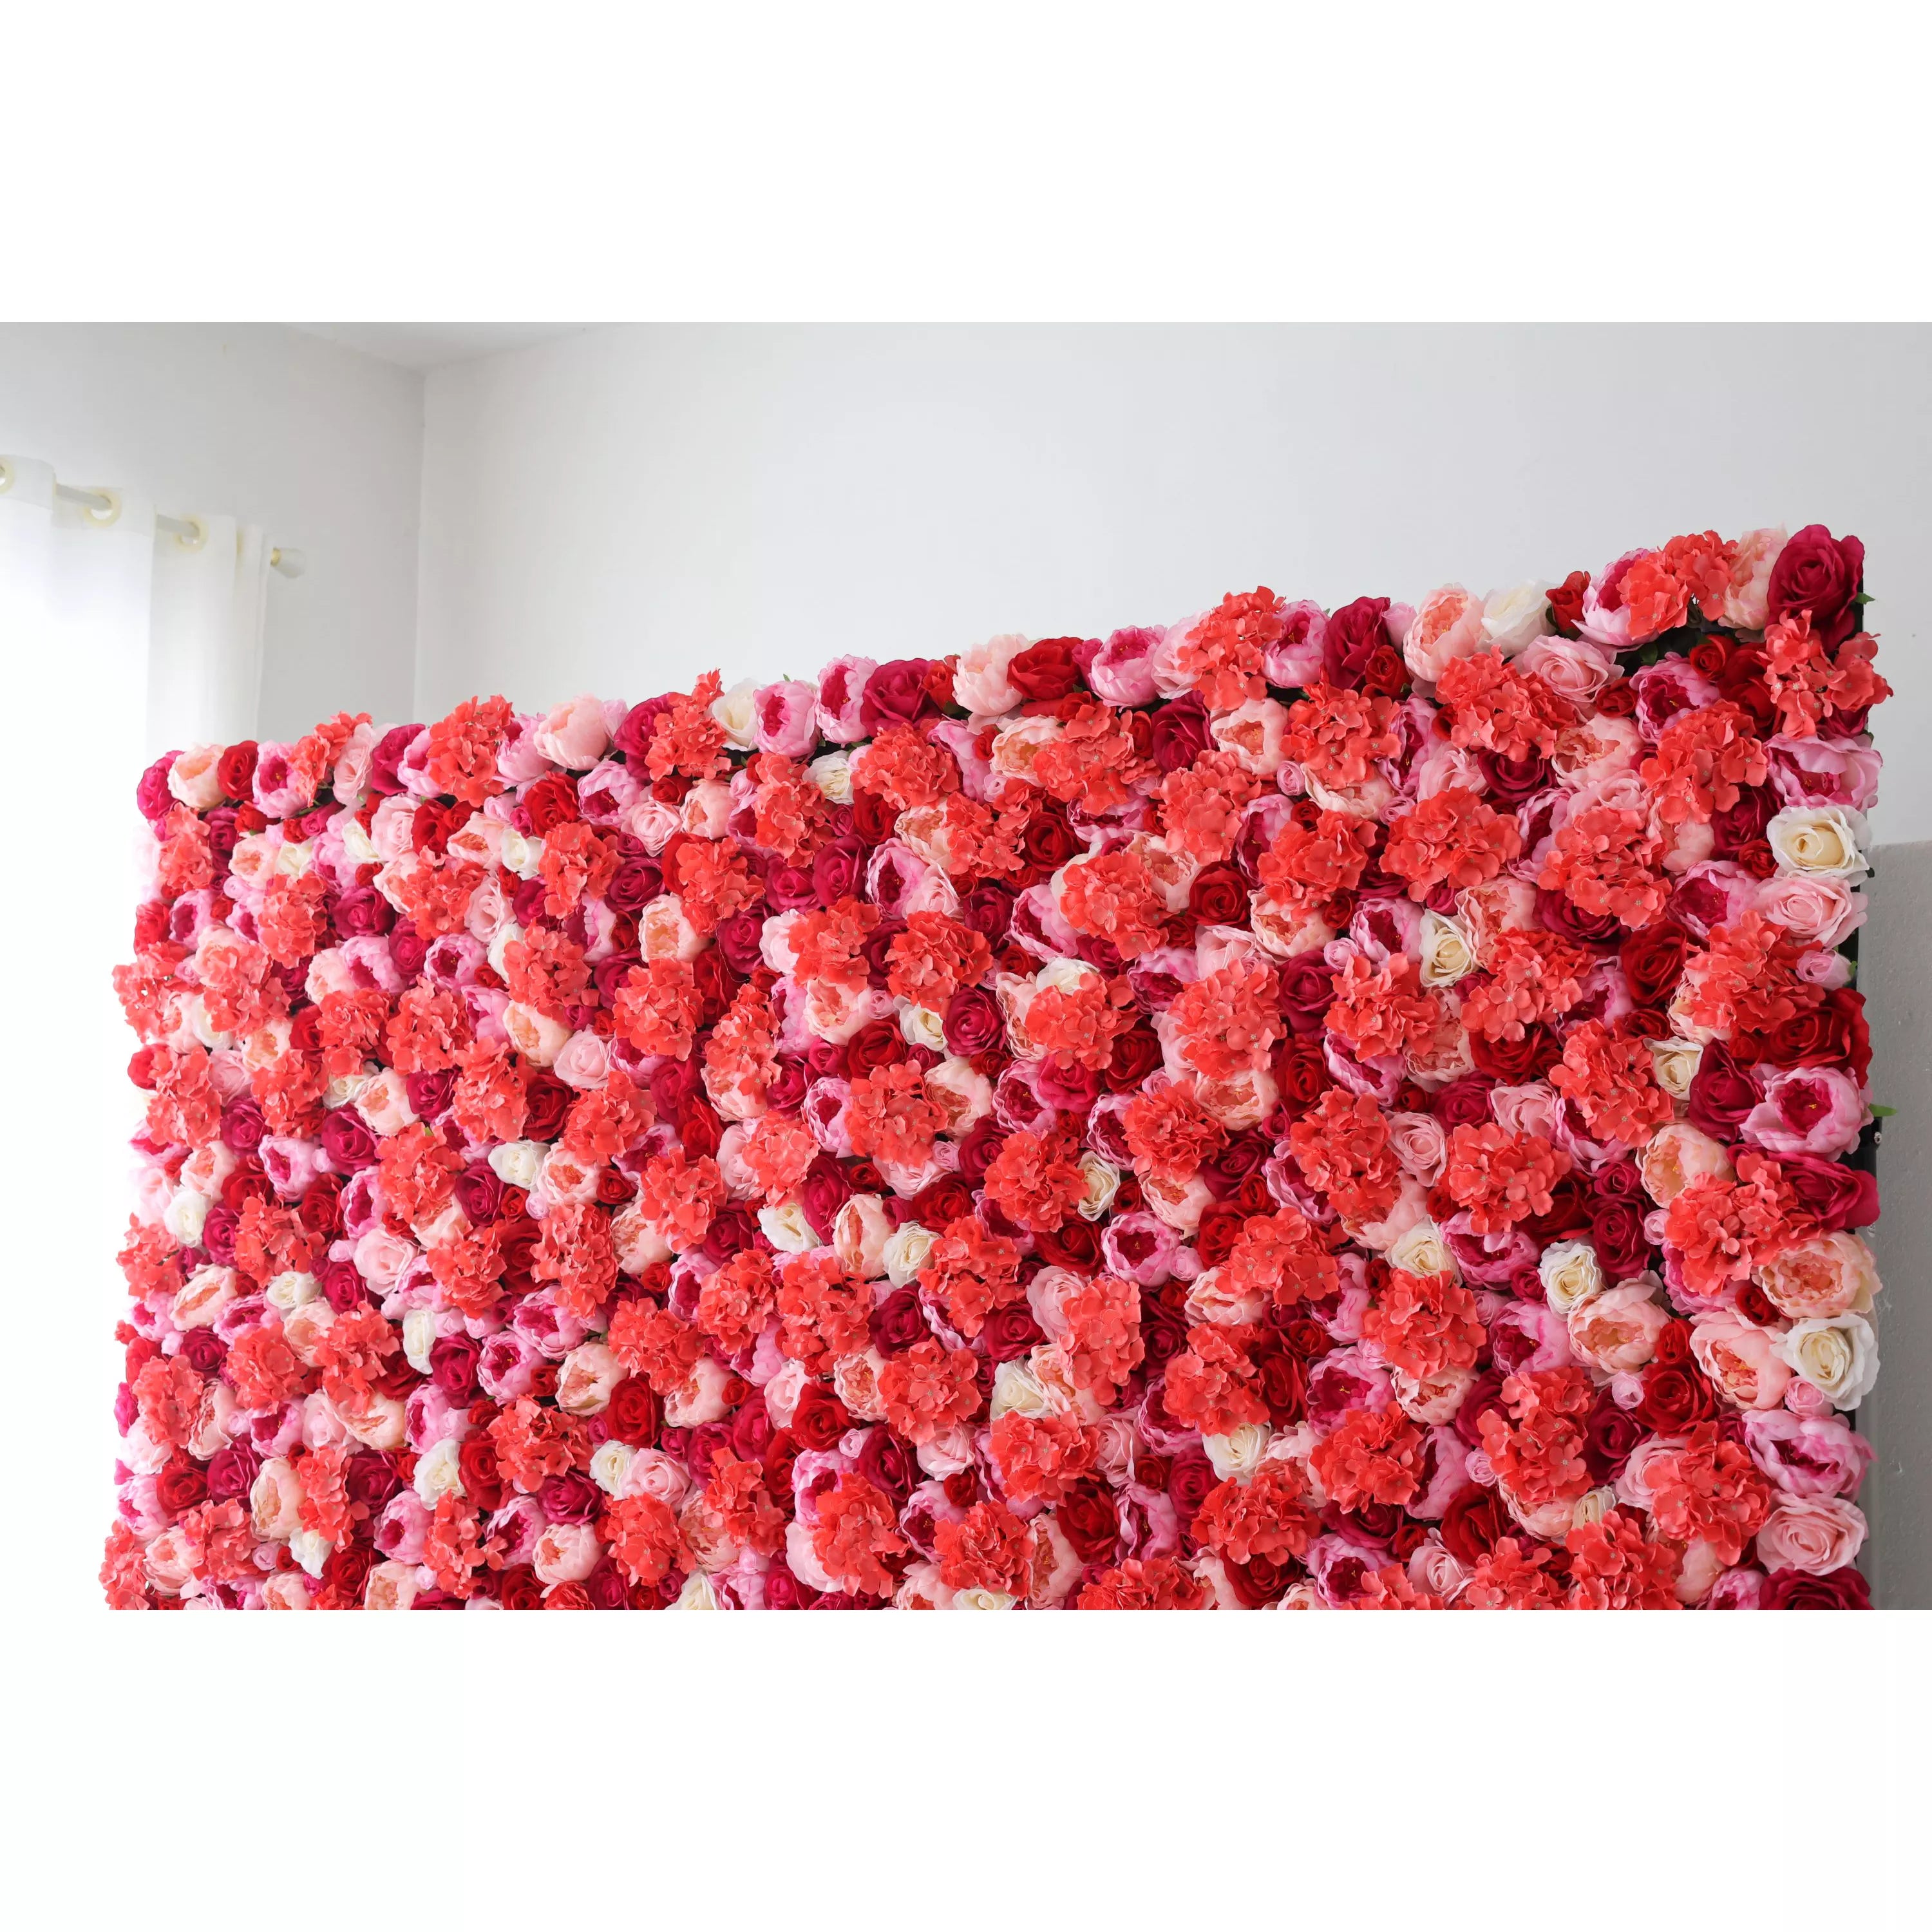 Valar Flowers Showcases: Crimson Cascade – A Vibrant Symphony of Rich Red & Subtle Pink Fabric Roses – The Quintessential Floral Canvas for Grand Ceremonies, Romantic Events & Deluxe Home Decor-VF-220